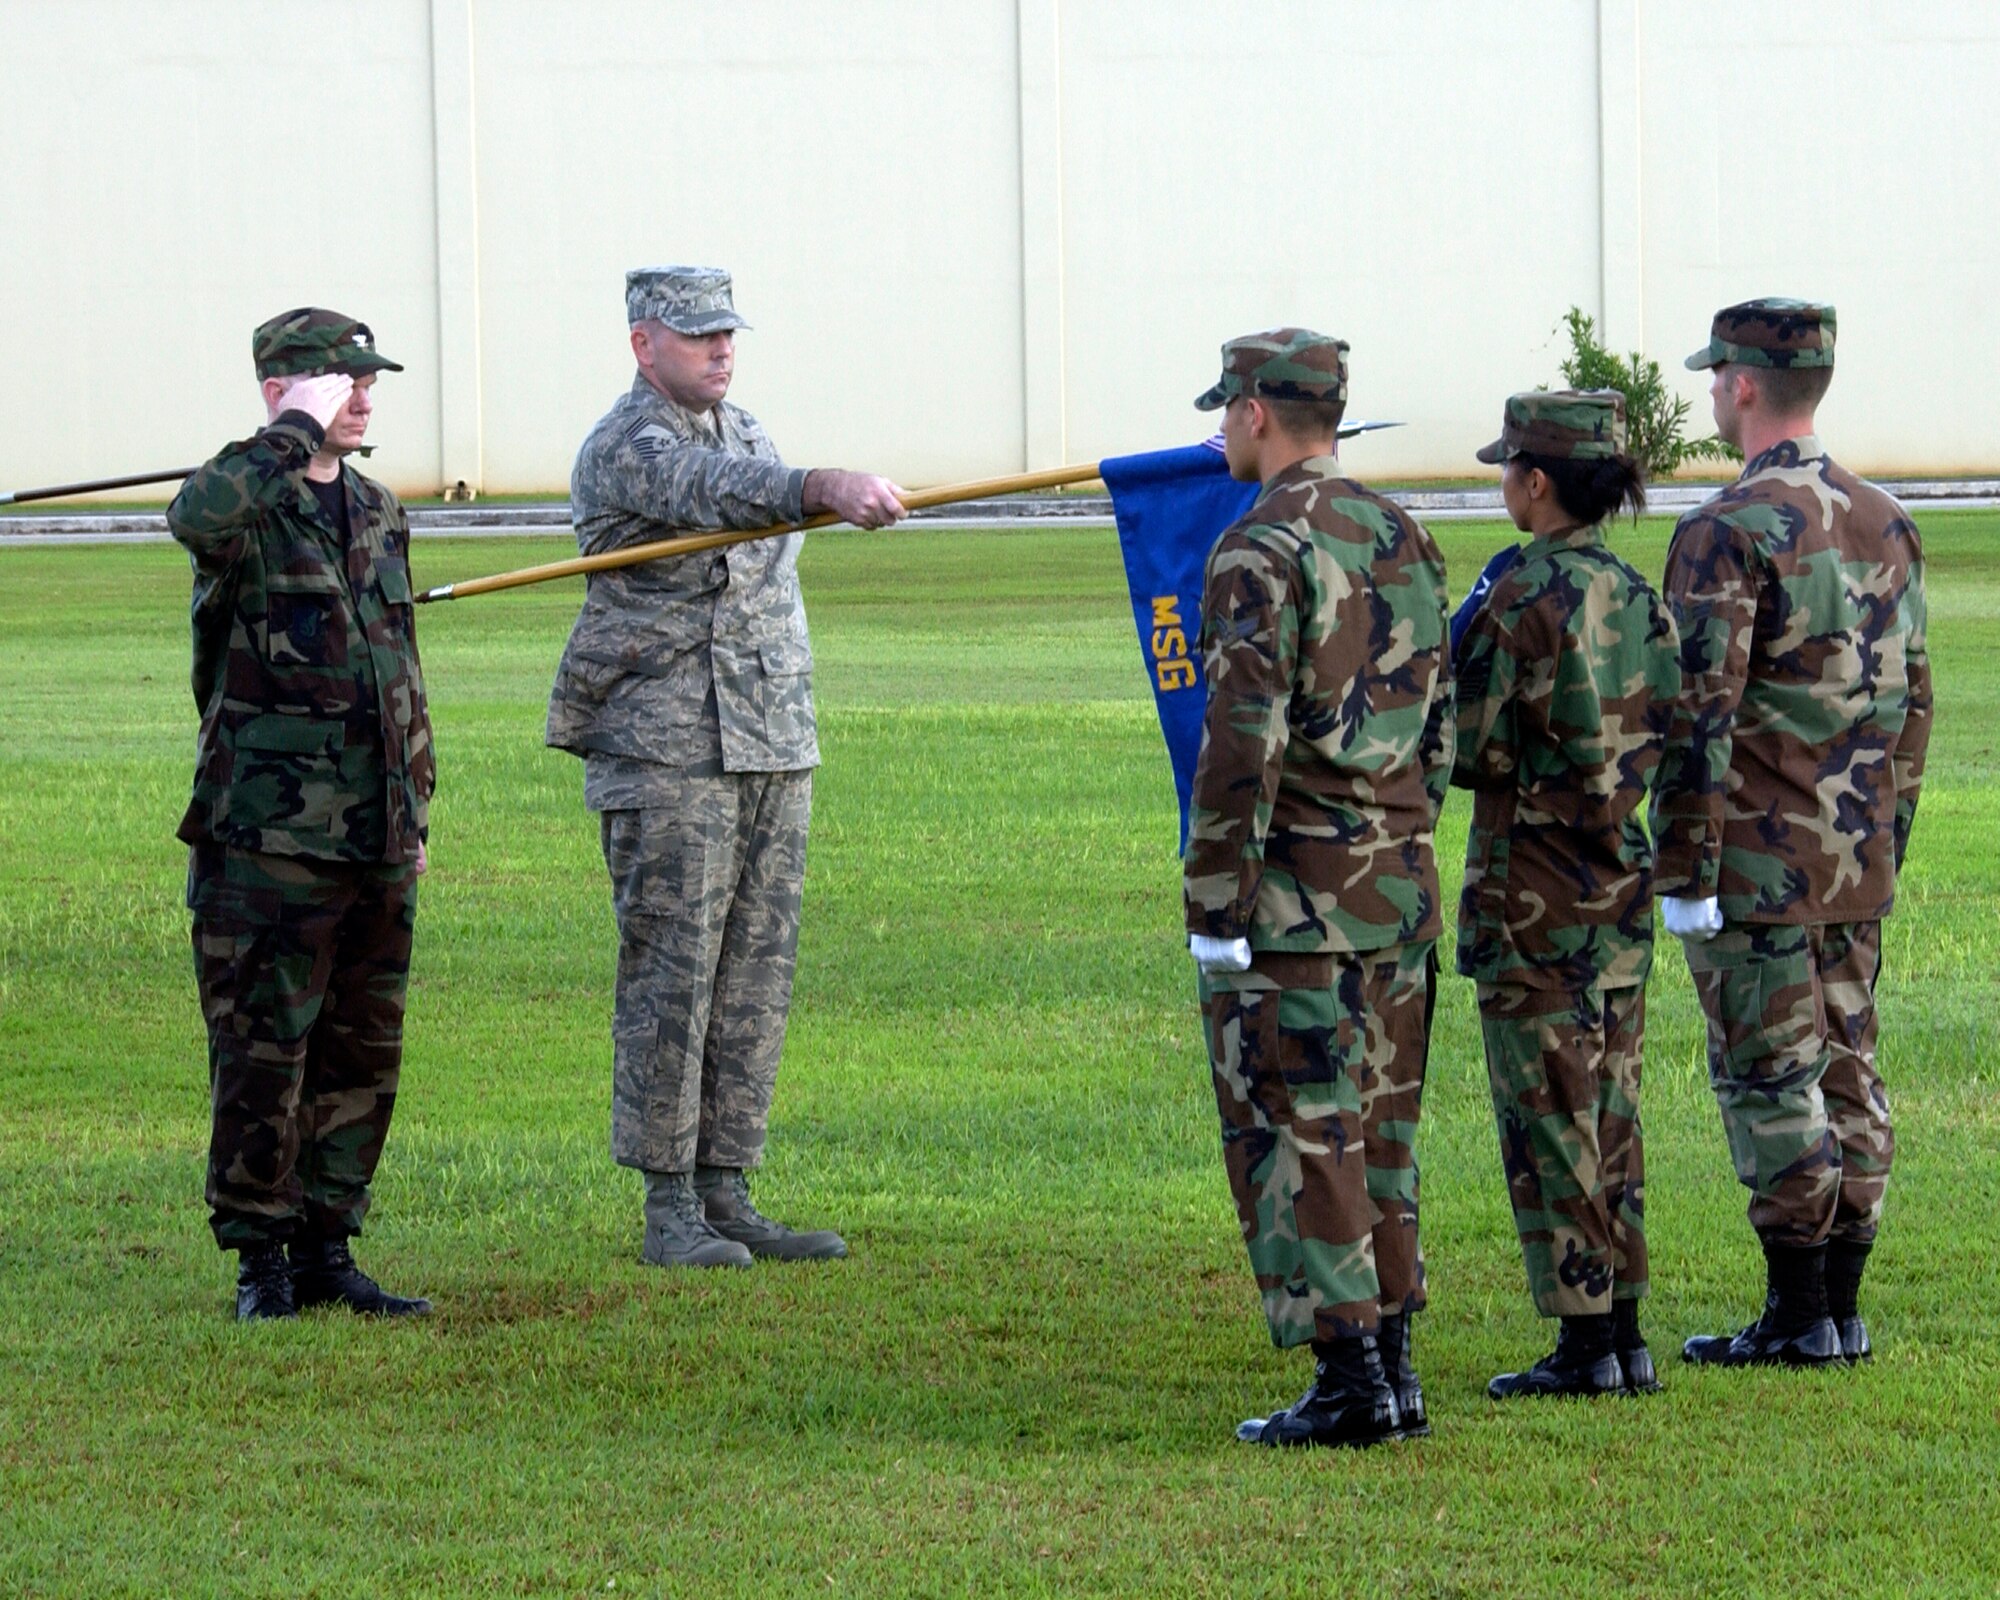 ANDERSEN AIR FORCE BASE GUAM, Colonel Mark Talley, Mission Support Group Commander, and Chief Master Sergeant Joseph Riff, Group Superintendent of the 36th Mission Support Group, pay respect to the flag during the Andersen Air Force Base's POW MIA retreat ceremony. Andersen Air Force base honors the fallen Prisoners Of War and those still Missing In Action with their annual remembrance ceremony.(U.S. Air Force Photo by Technical Sergeant Michael Boquette)(RELEASED)